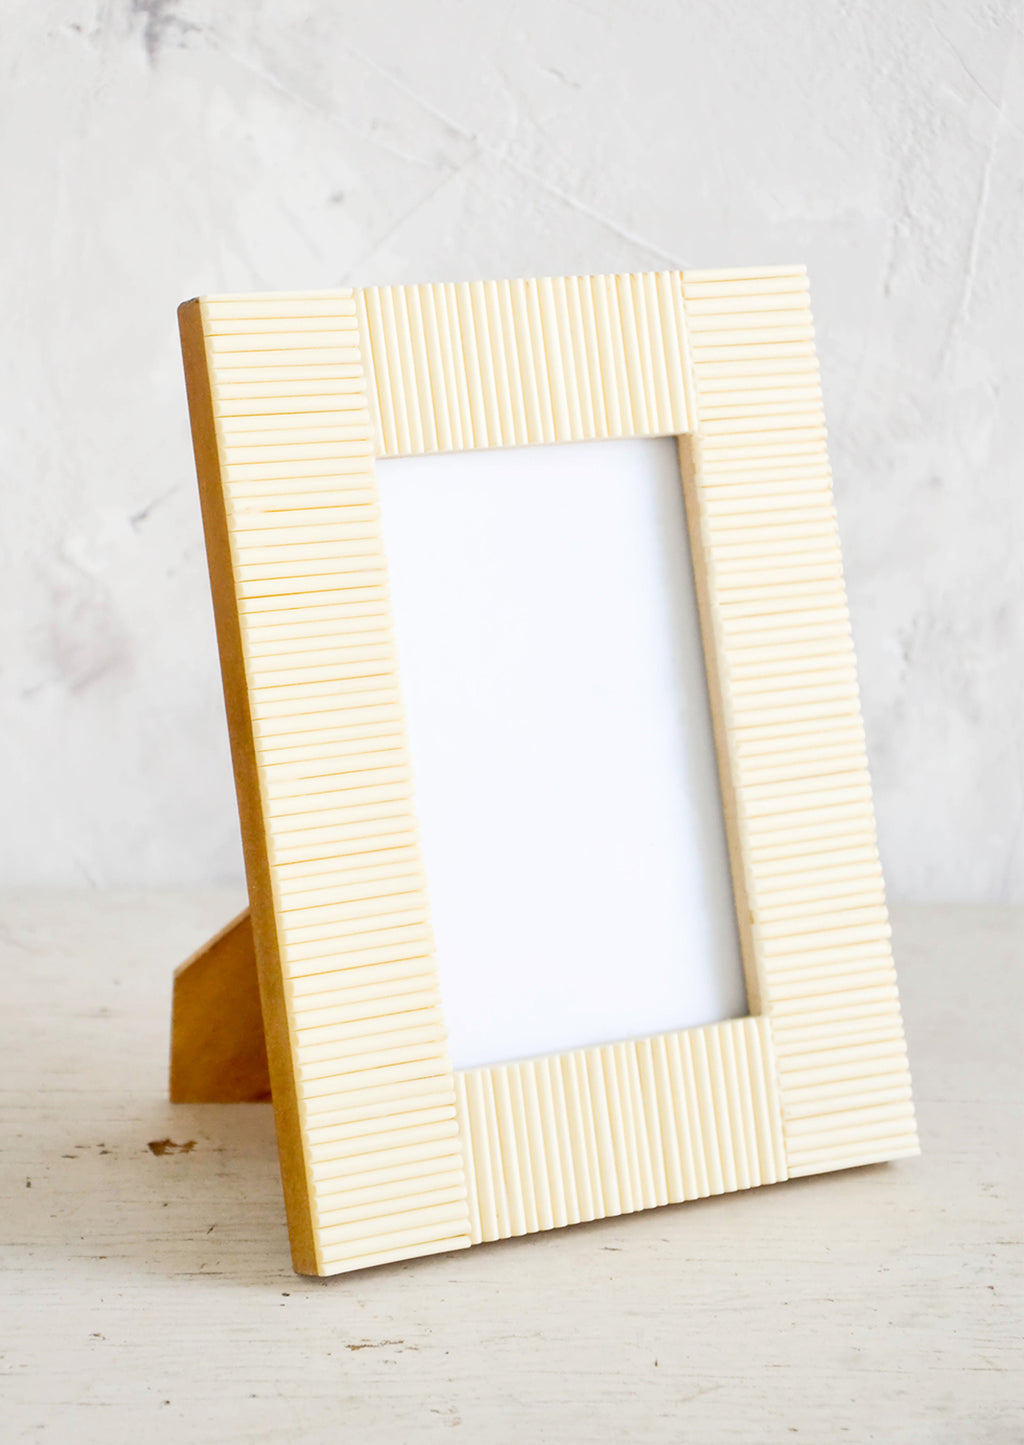 1: Empty picture frame on table. Frame is cream colored with ribbed texture made from bone.